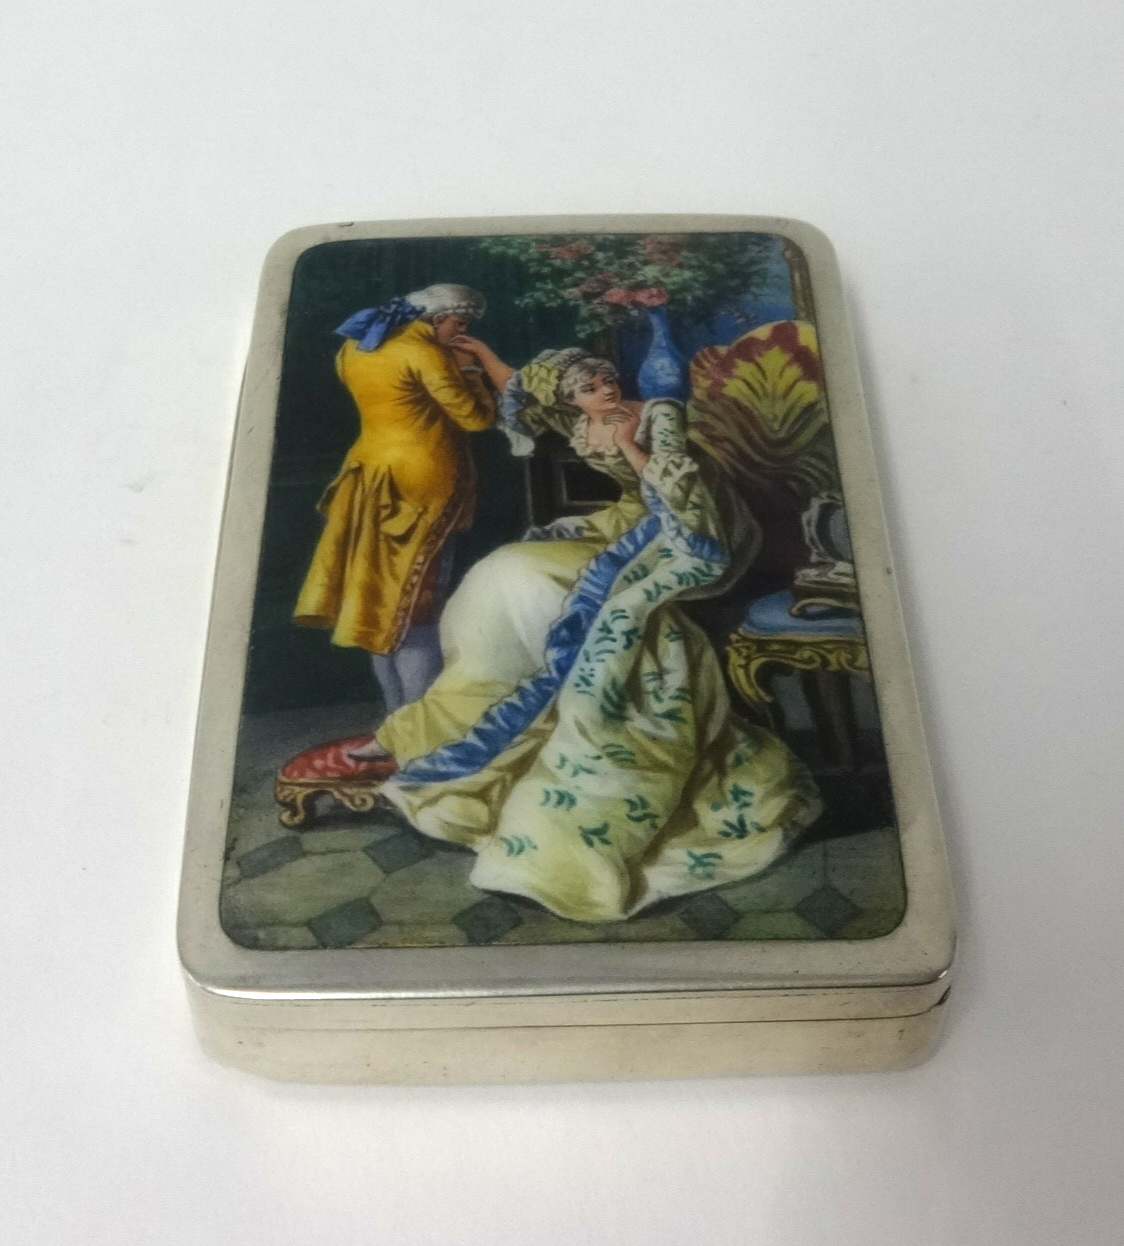 An enamelled box (no hallmark), approx 9.50cm x 6.50cm, decorated with classical romantic scene of a